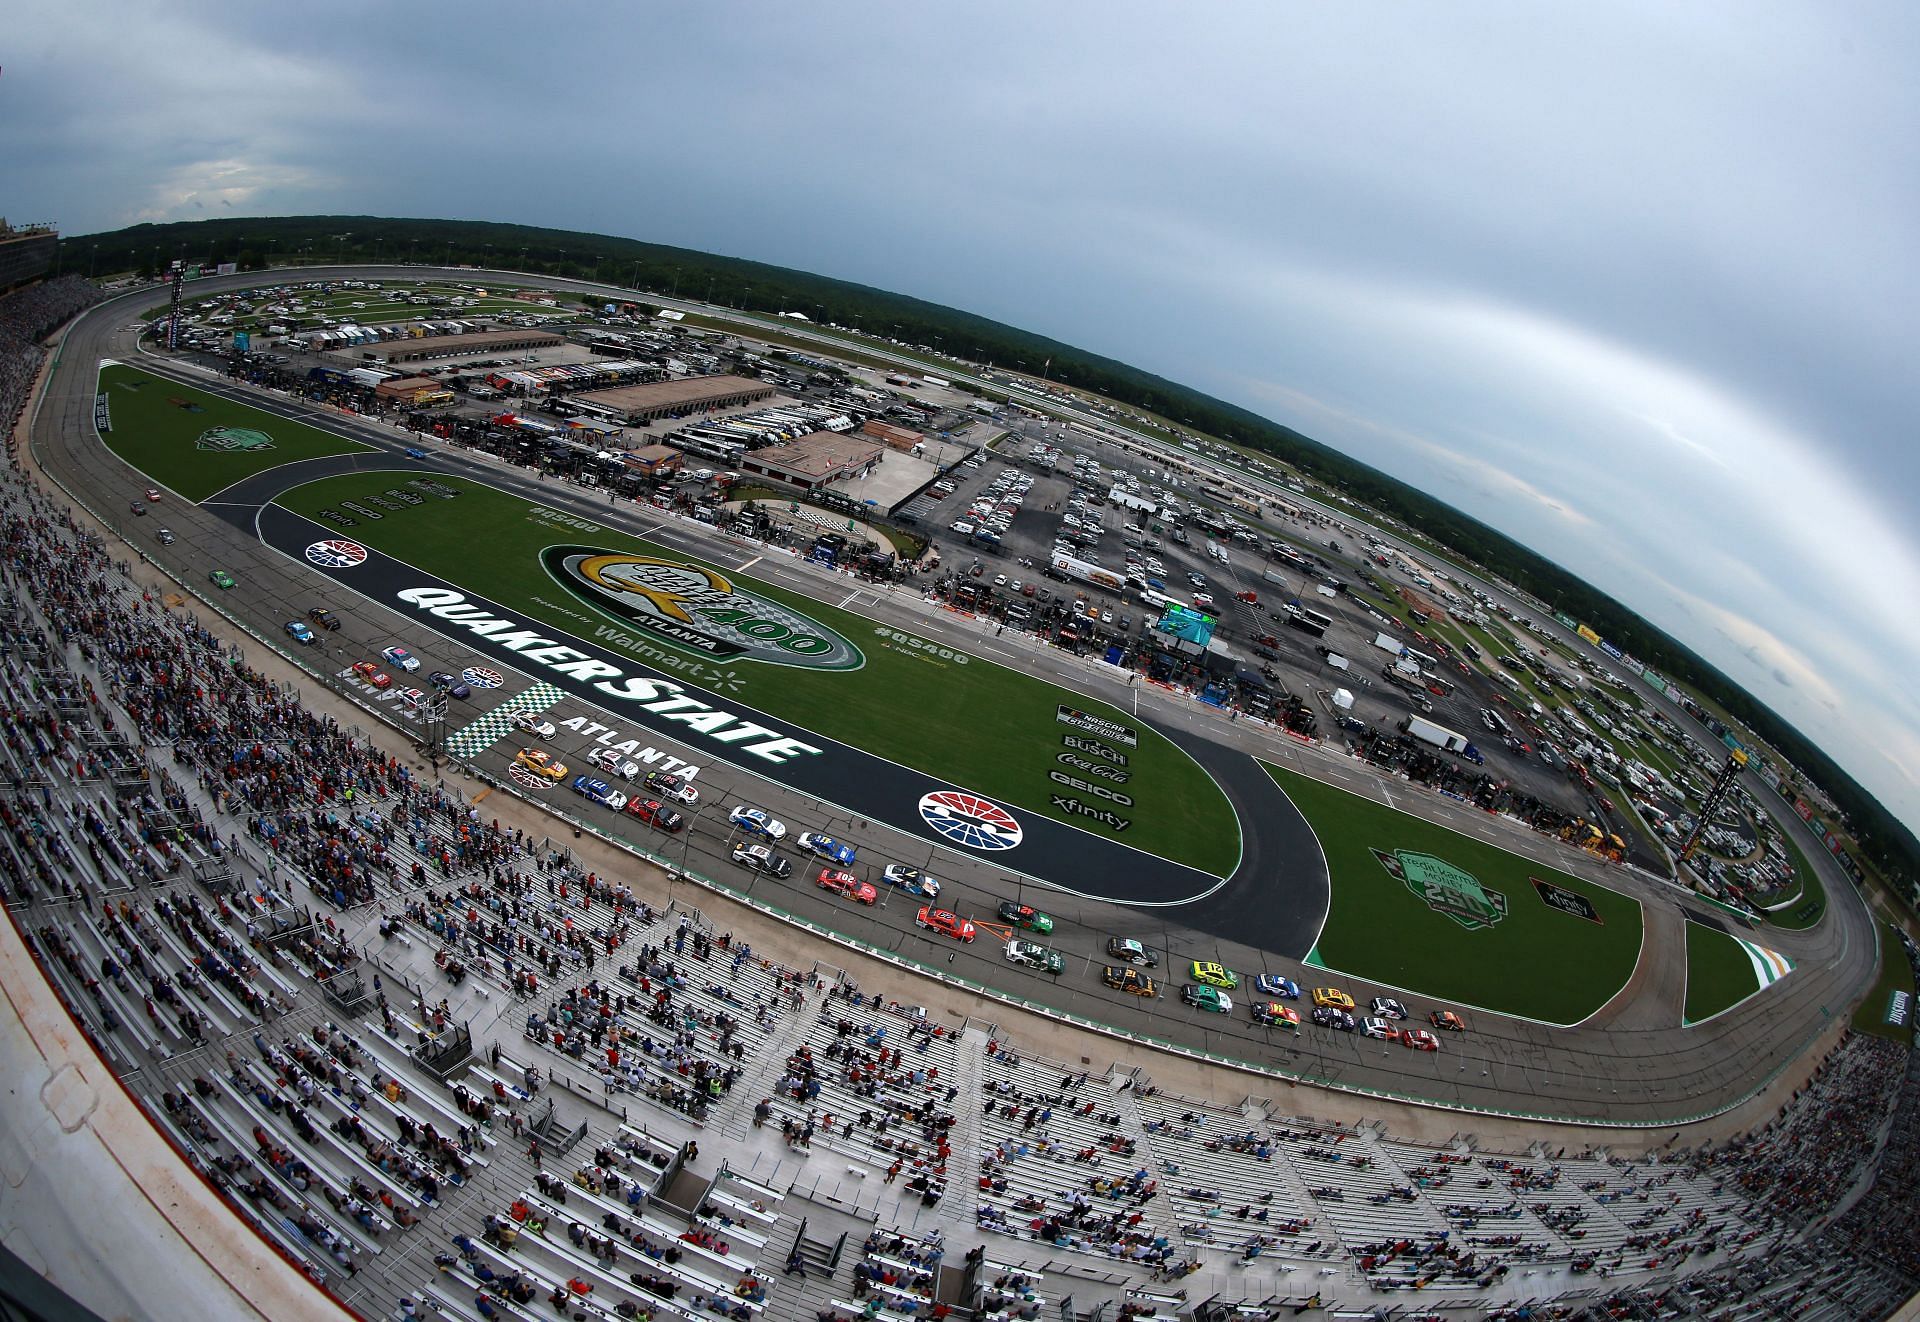 A general view of cars on track during the NASCAR Cup Series Quaker State 400 presented by Walmart at Atlanta Motor Speedway (Photo by Sean Gardner/Getty Images)